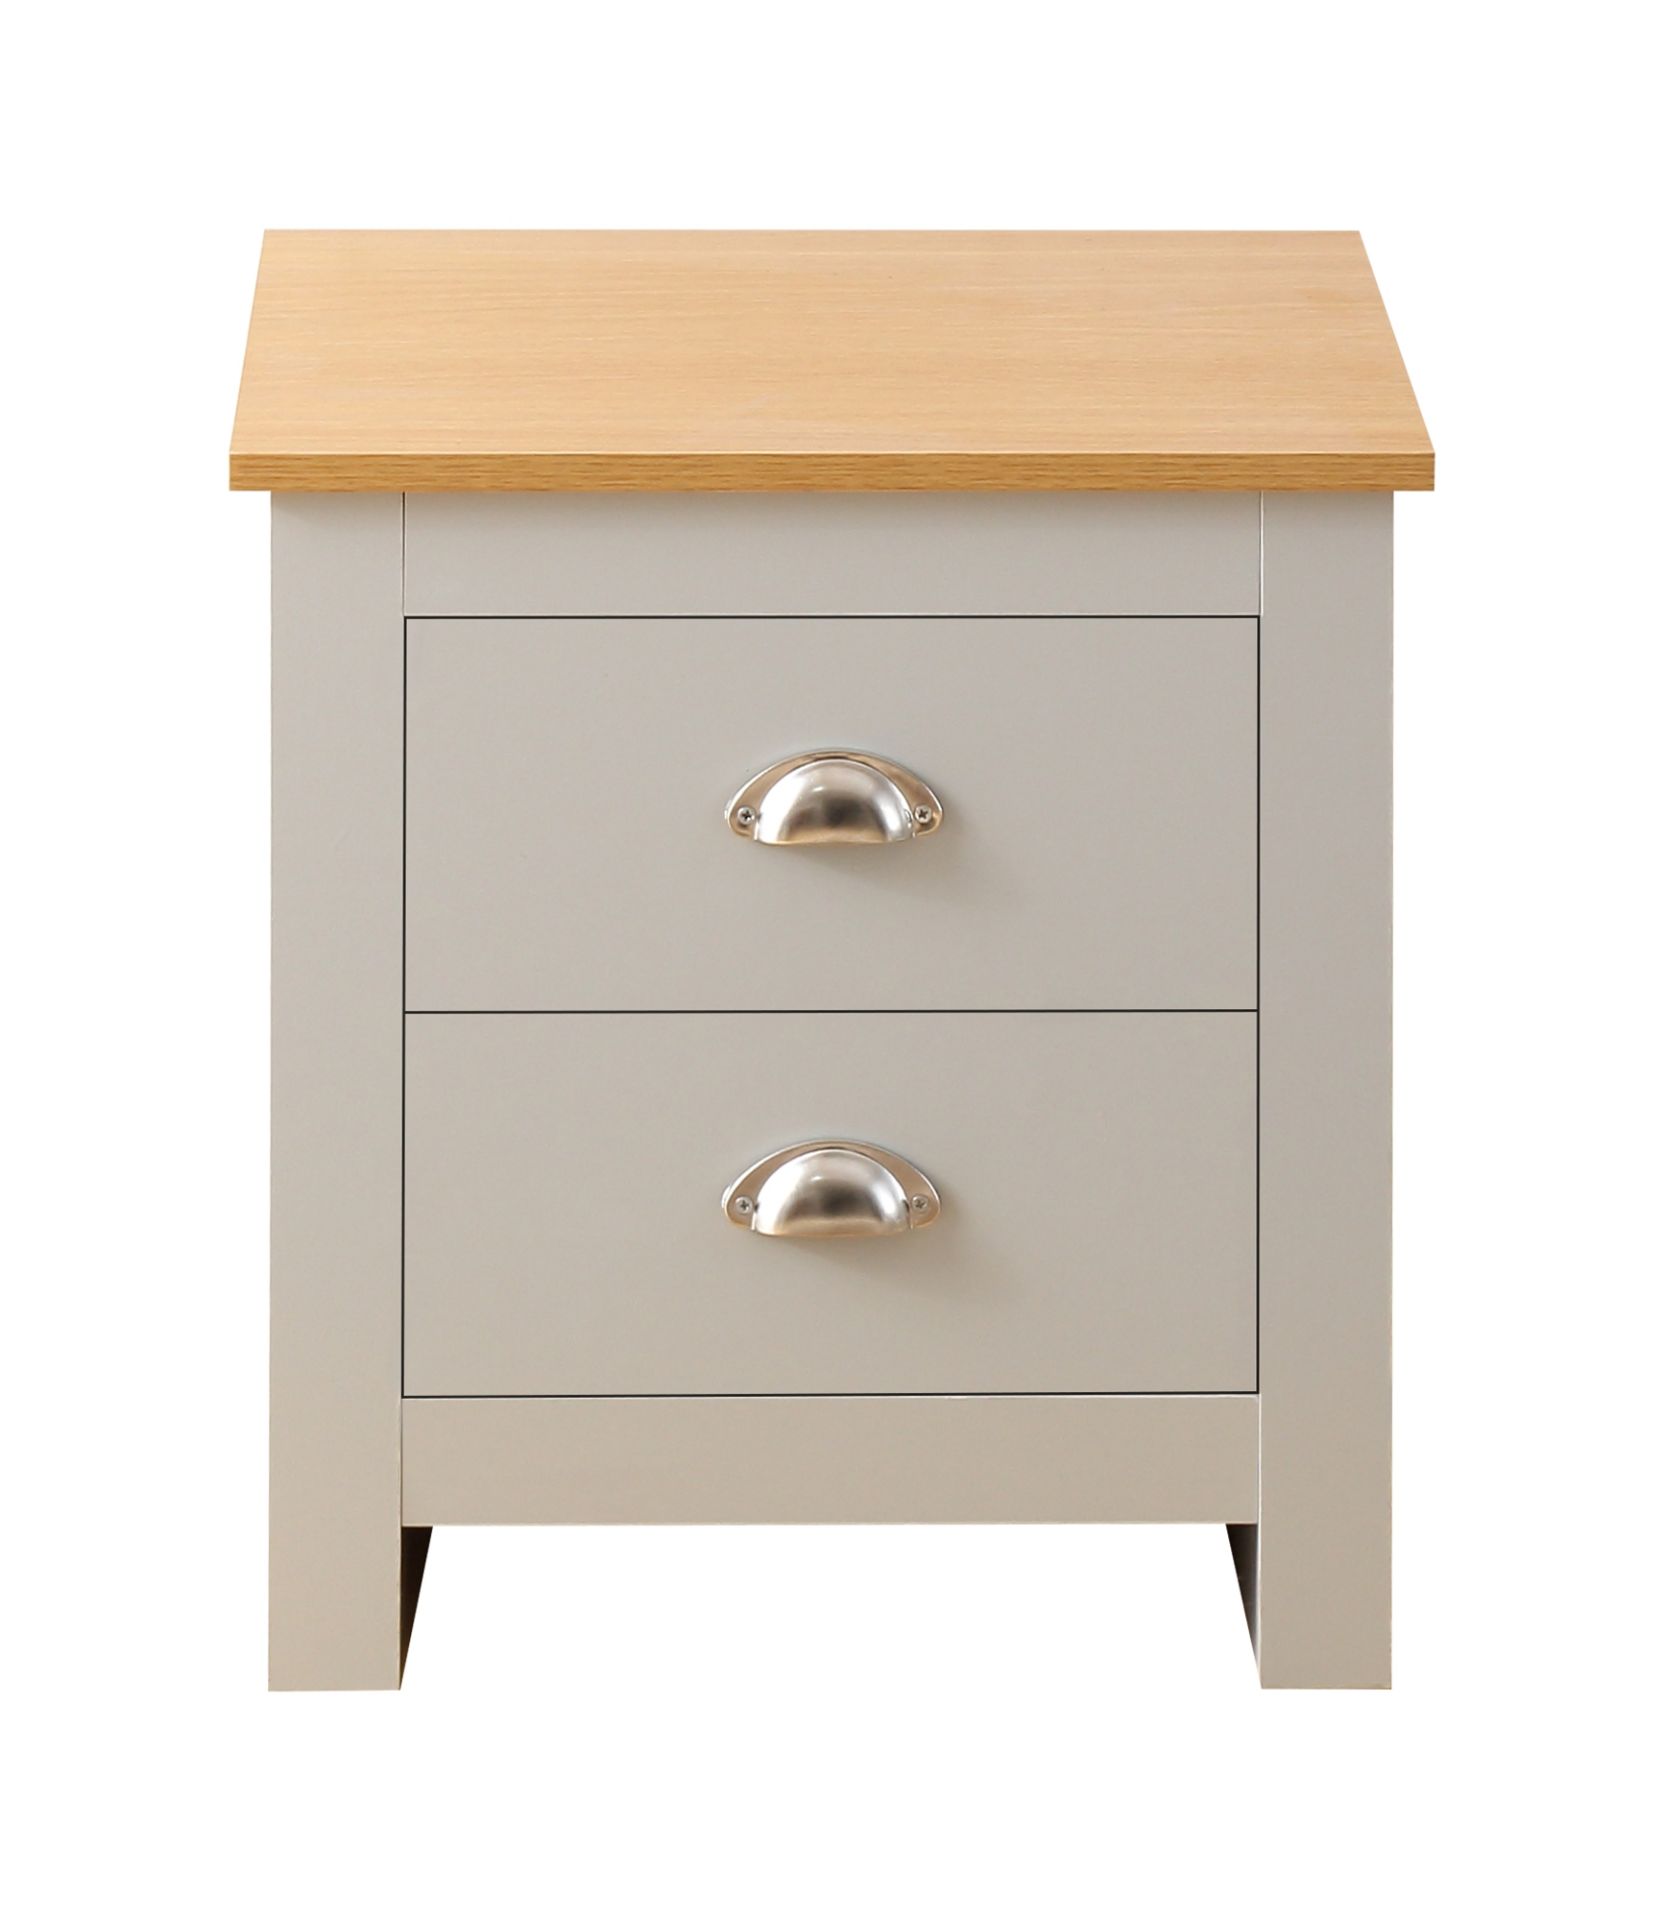 PAIR OF GREY WITH OAK TOP SHAKER-INSPIRED STYLISH DESIGN BEDSIDES - Bild 2 aus 4